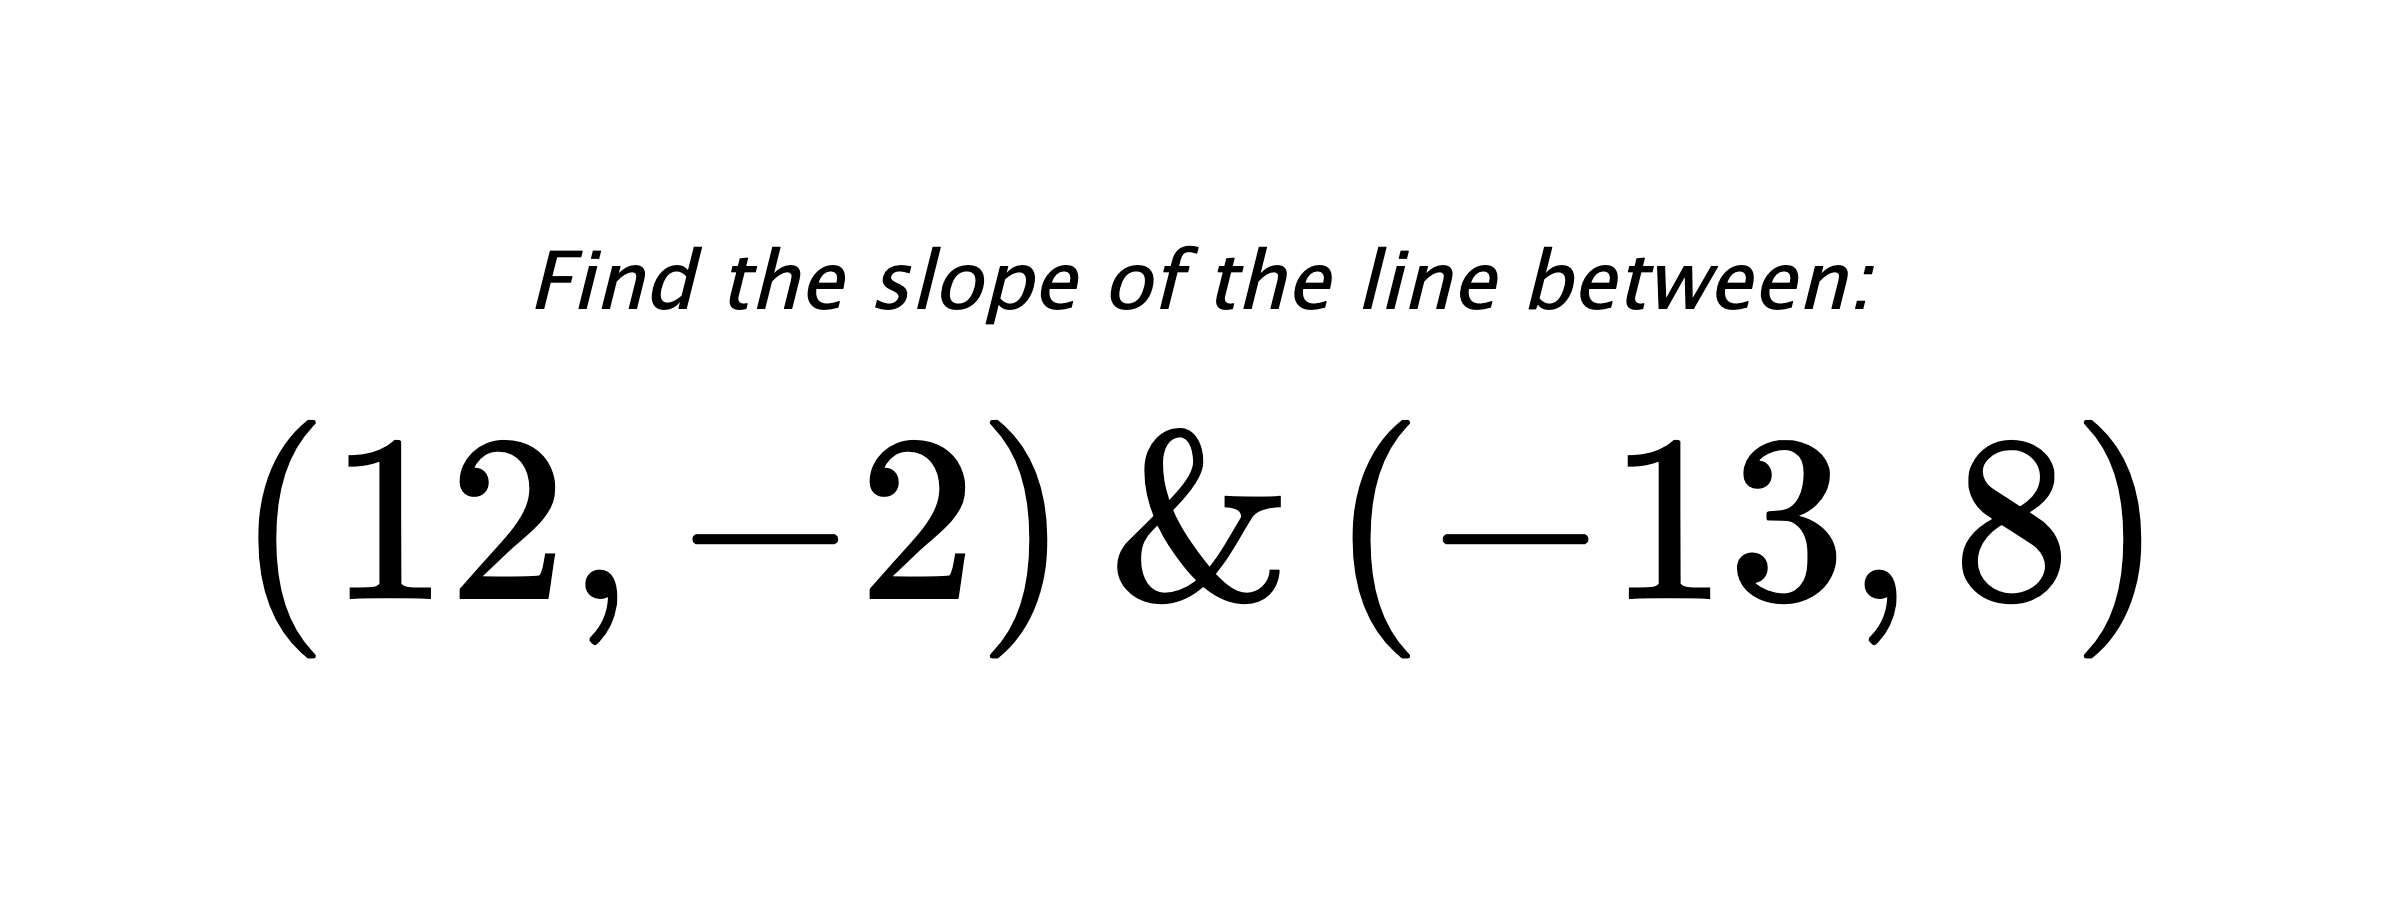 Find the slope of the line between: $ (12,-2) \hspace{0.5cm} \text{&} \hspace{0.5cm} (-13,8) $